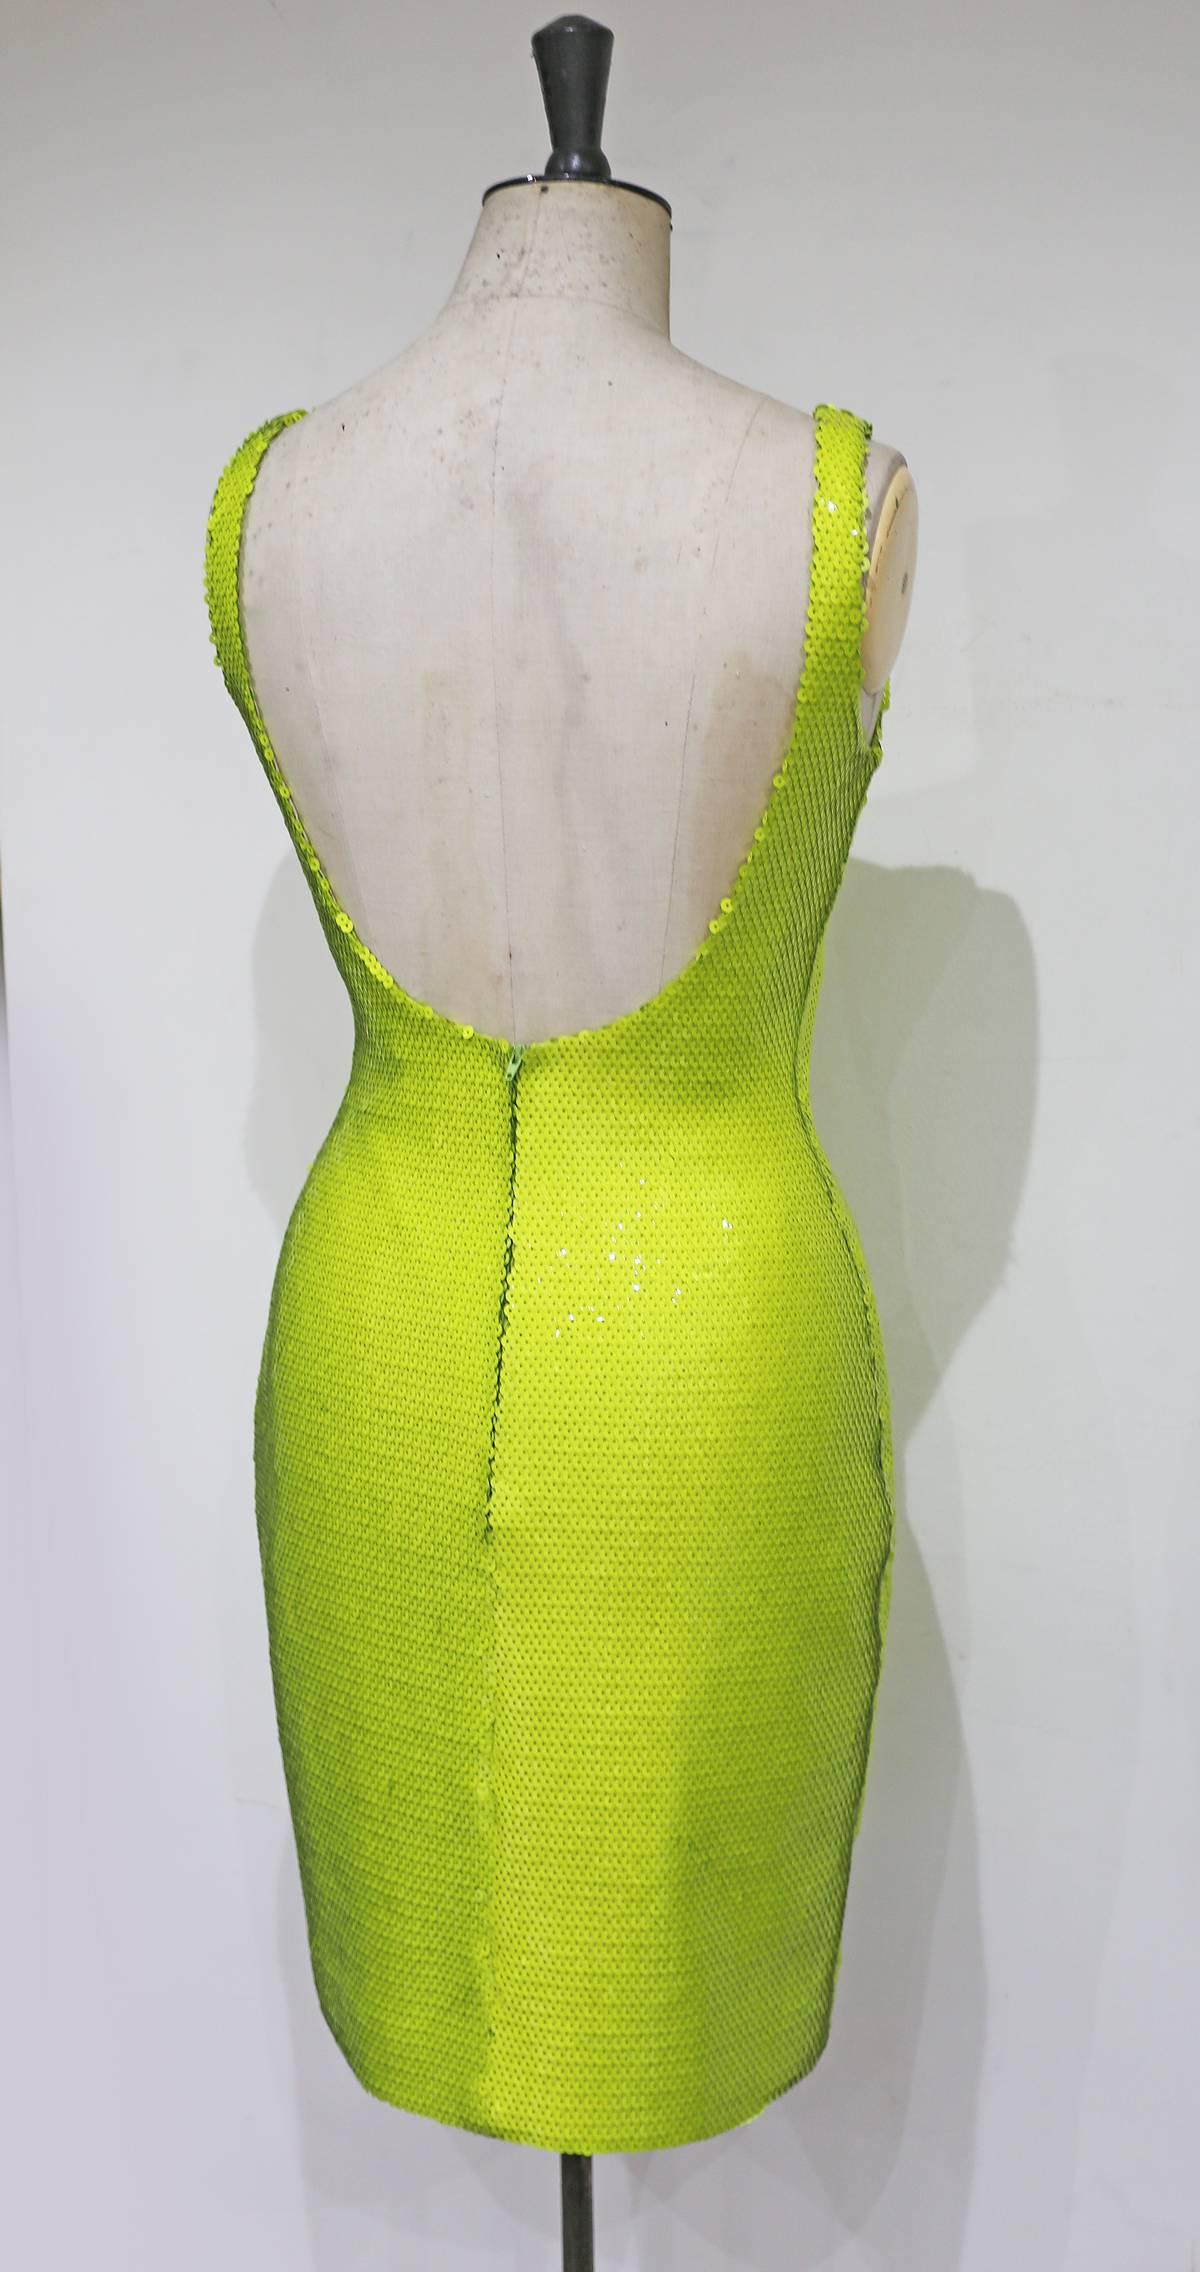 Rare Stephen Sprouse bodycon evening dress from the 1980s. The dress has low back and is covered in sequins throughout.   US 8 - UK 12 - FRENCH (EU) 40